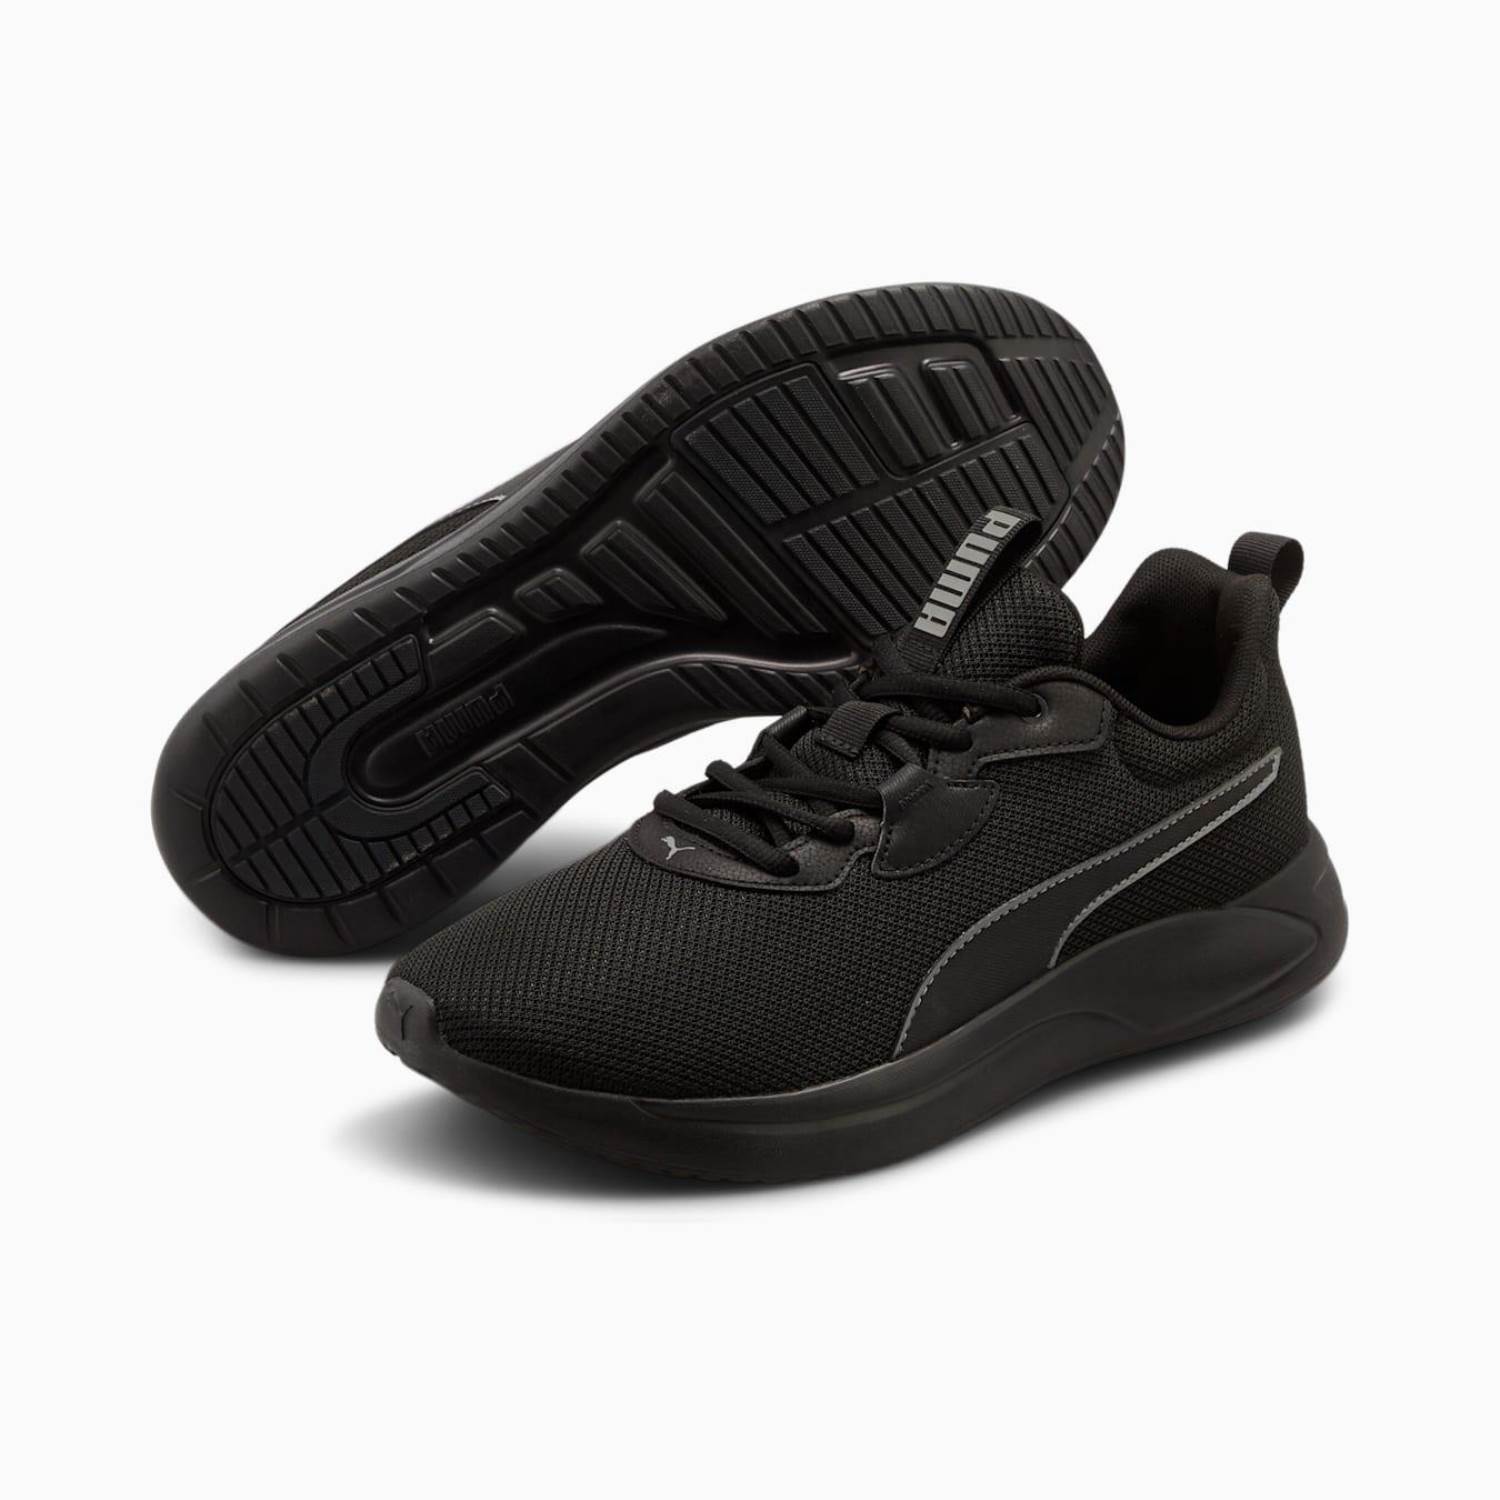 Buy VELLORE Men's Sneakers Casual Stylish Shoes (Full Black, 6) at Amazon.in